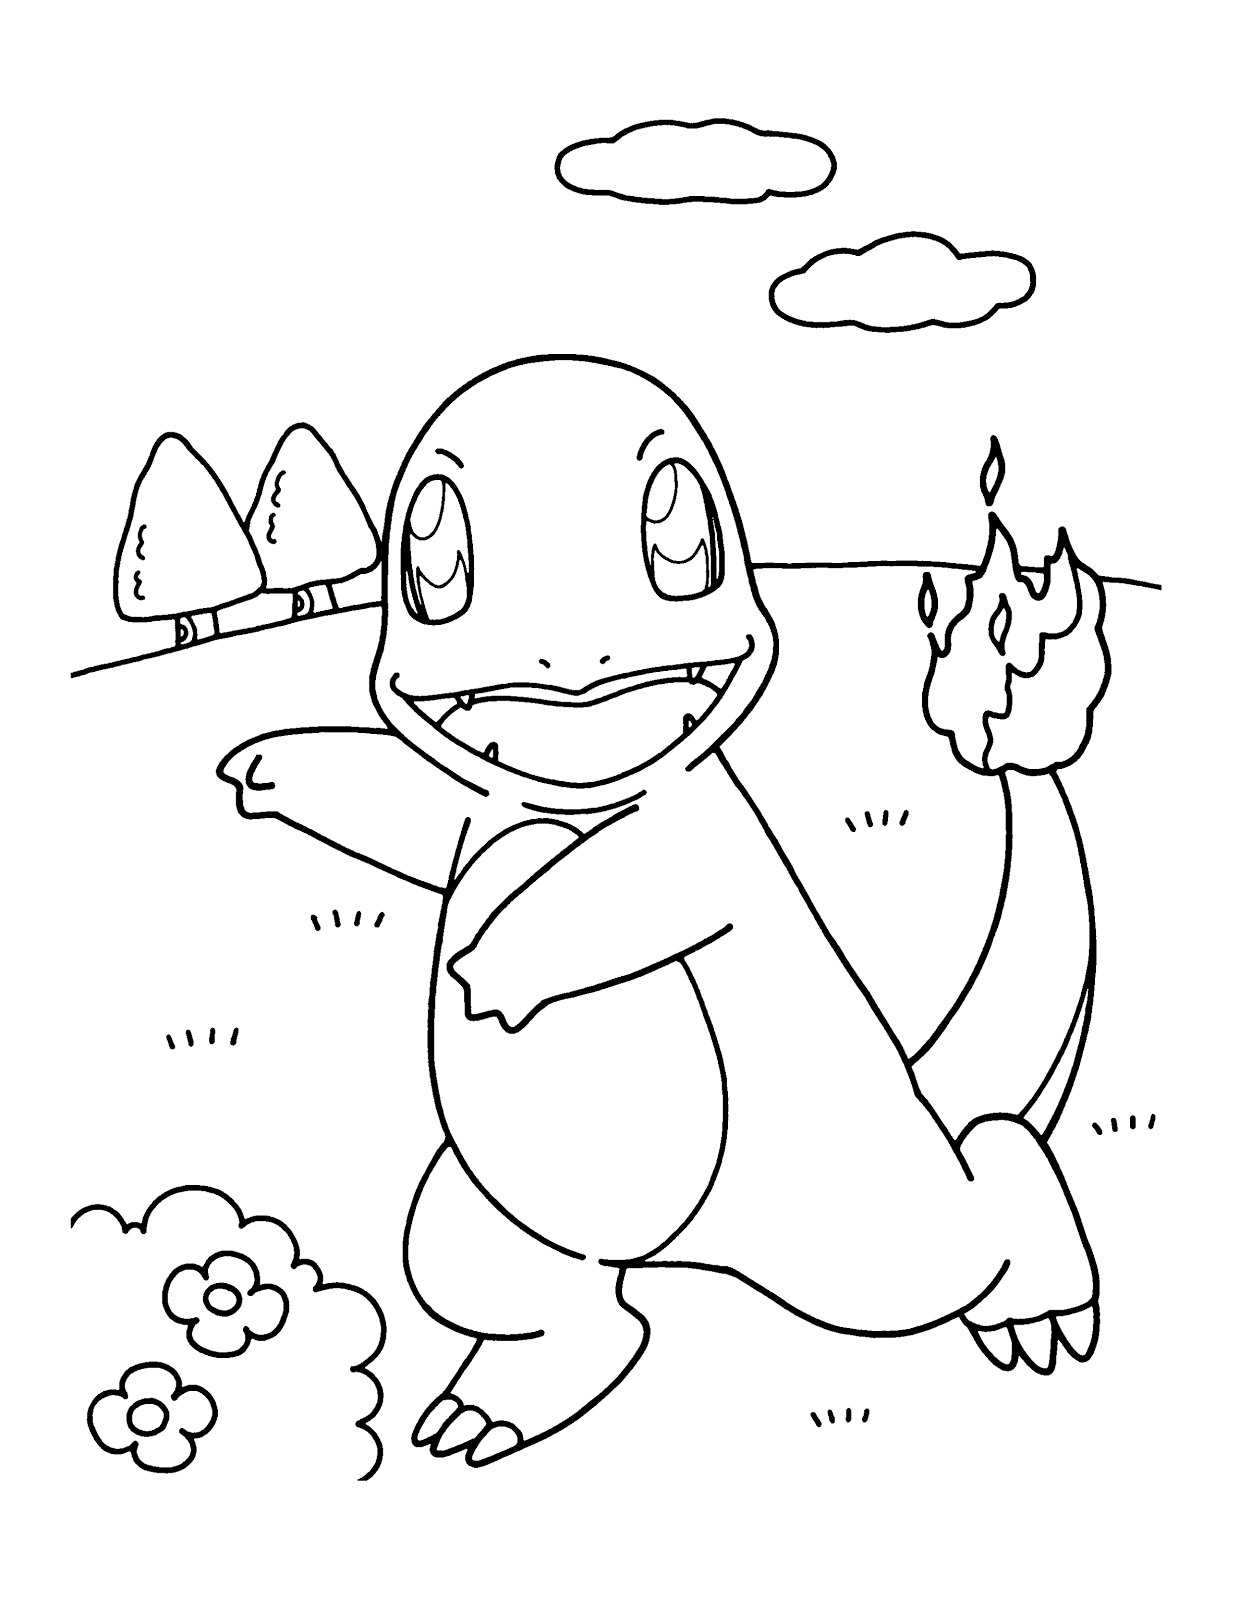 Charmander Coloring Pages Free Pokemon Coloring Pages Pokémon is all the rage, especially since the release of pokémon go! charmander coloring pages free